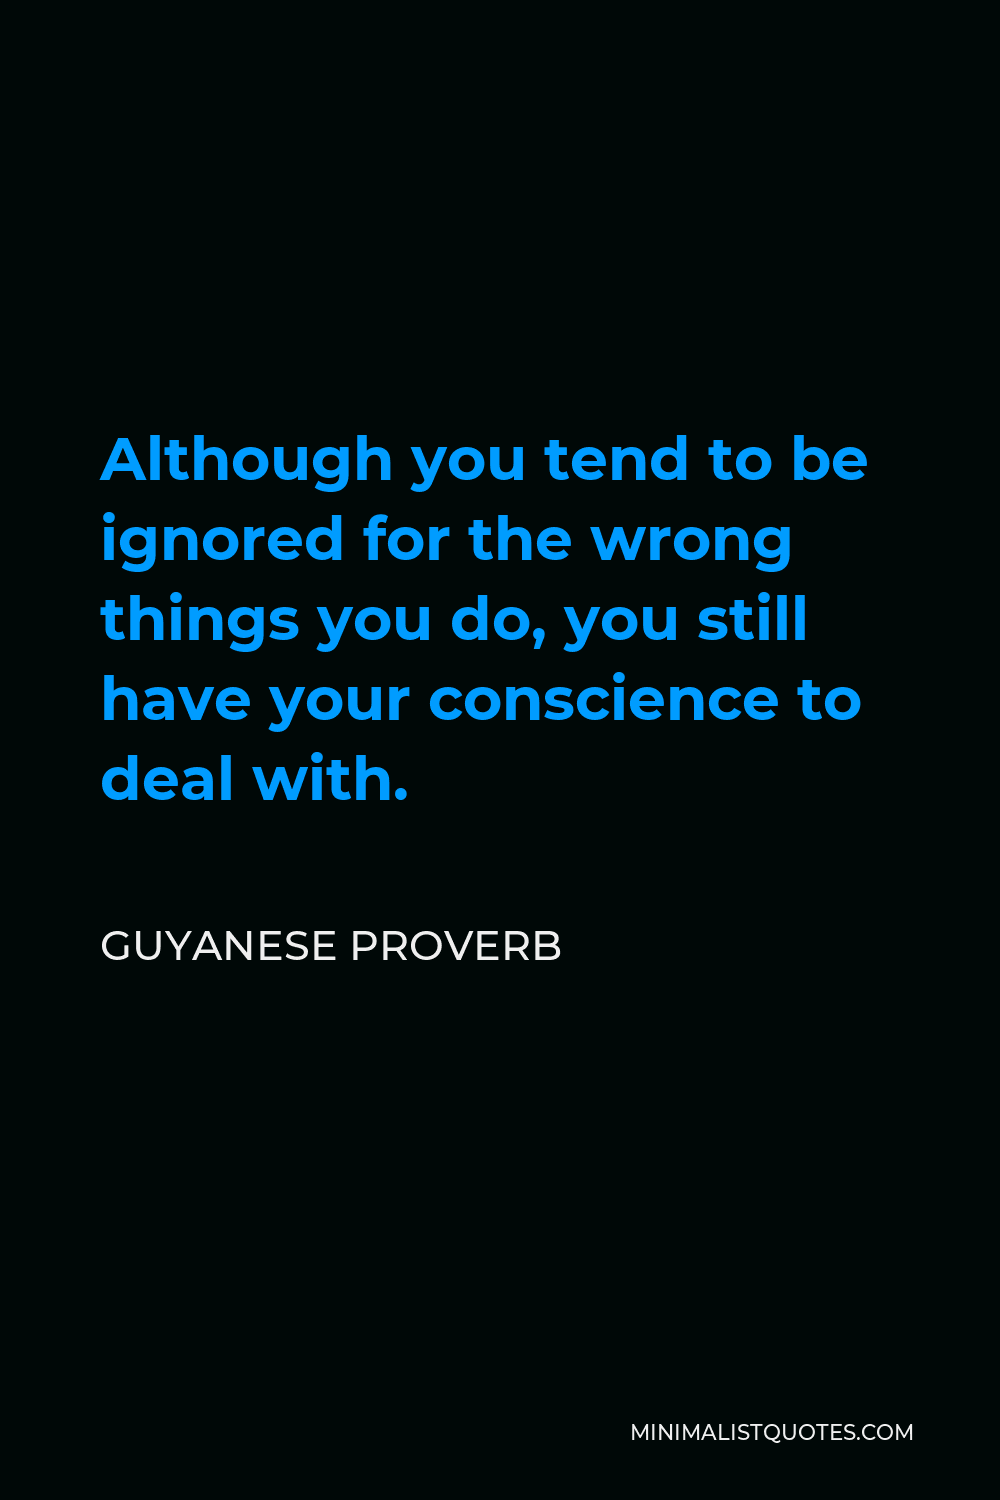 Guyanese Proverb Quote - Although you tend to be ignored for the wrong things you do, you still have your conscience to deal with.